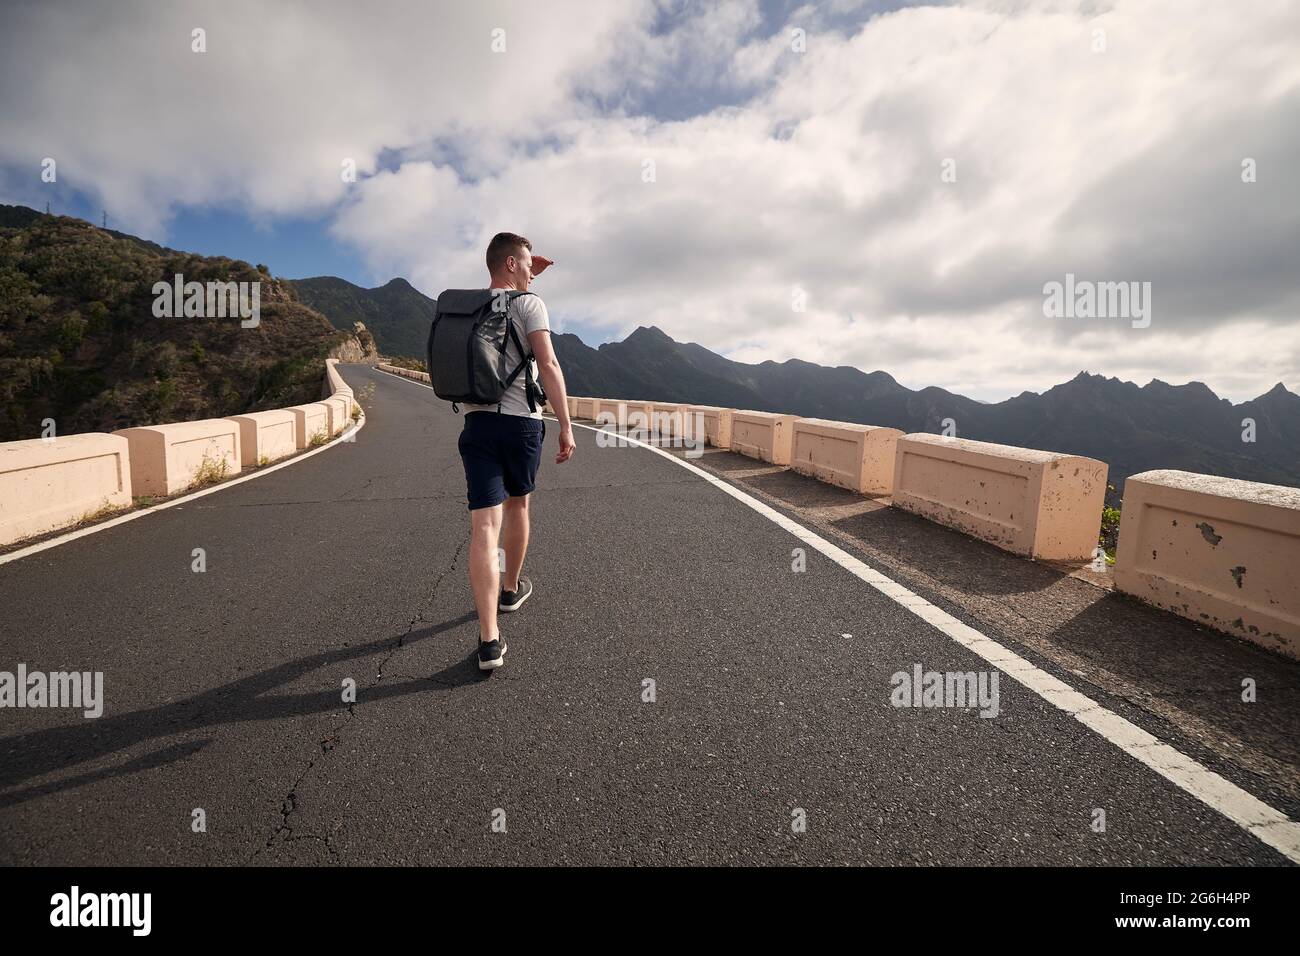 Rear view of man with backpack on mountain road. Young tourist enjoys trip on sunny day. Tenerife, Canary Islands, Spain. Stock Photo